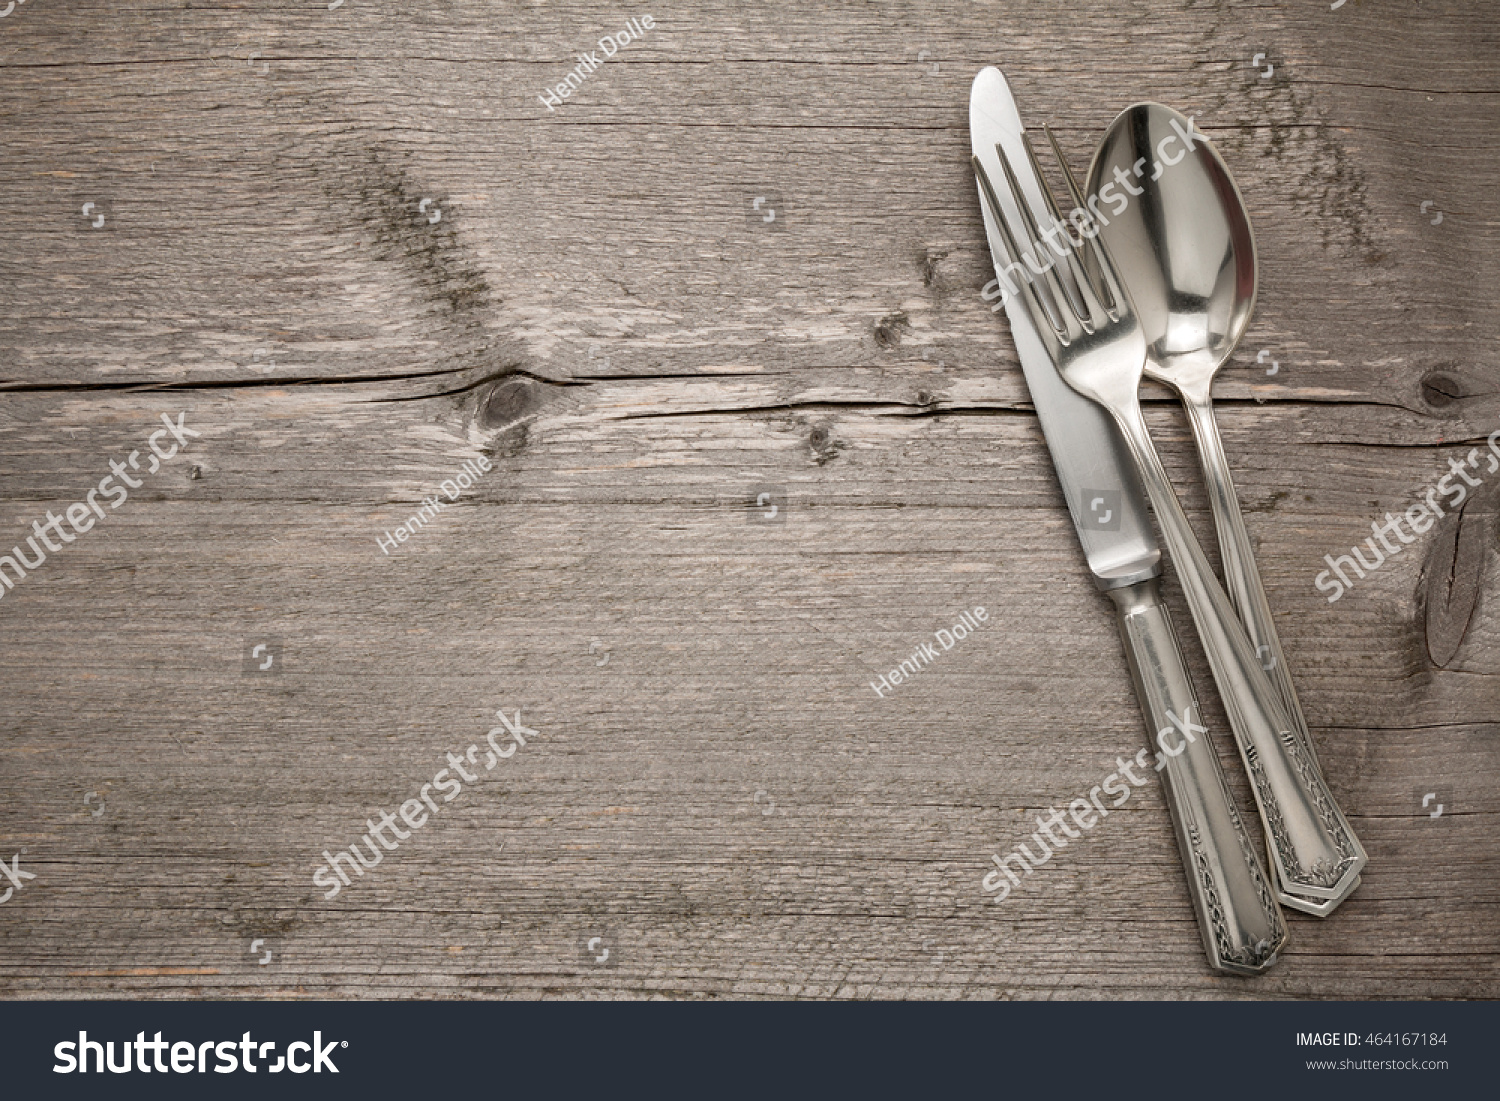 Cutlery is in a napkin wrapped on an old table #464167184